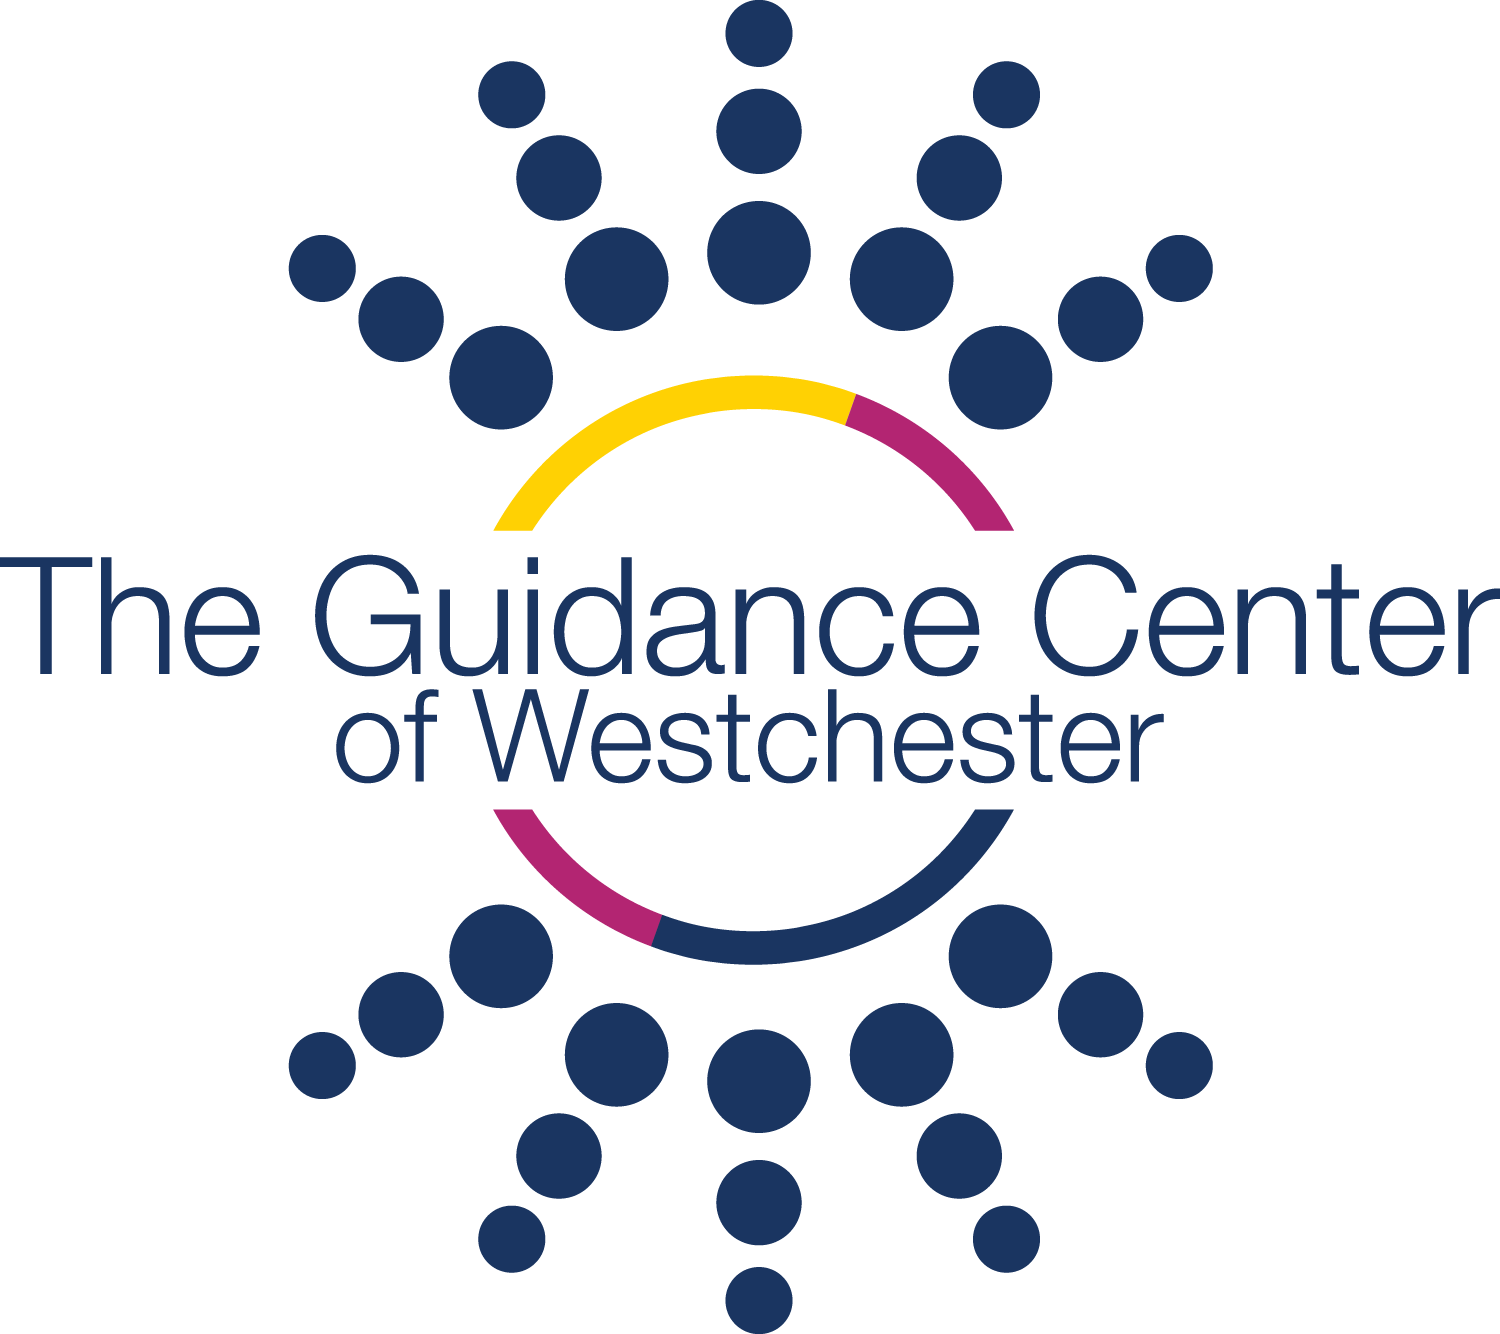 The Guidance Center of Westchester